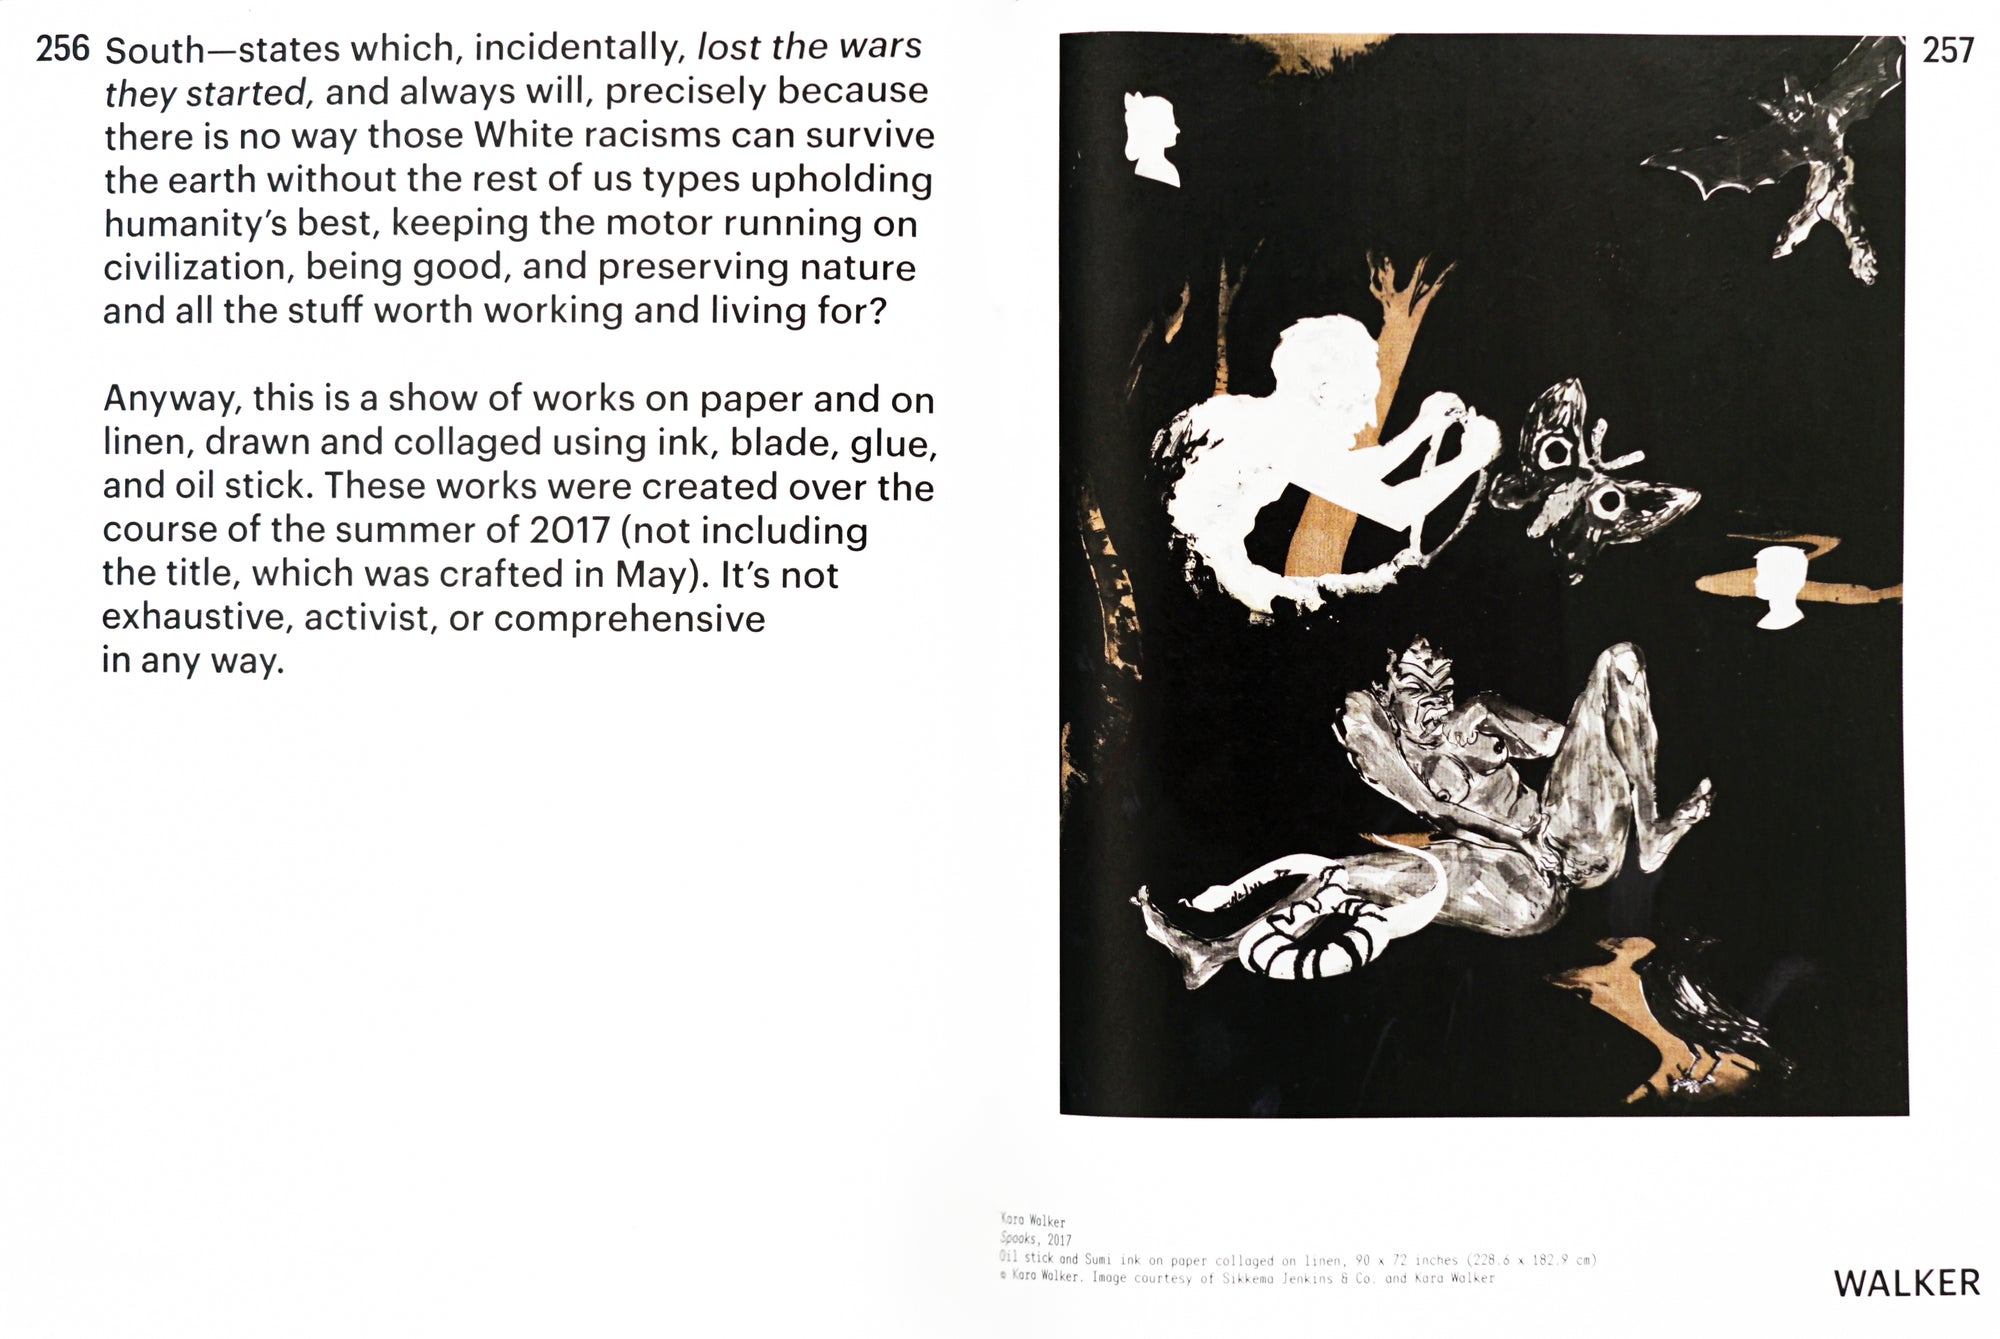 Sans serif type on left with a painting by Kara Walker on right, both pages have a white backdrop